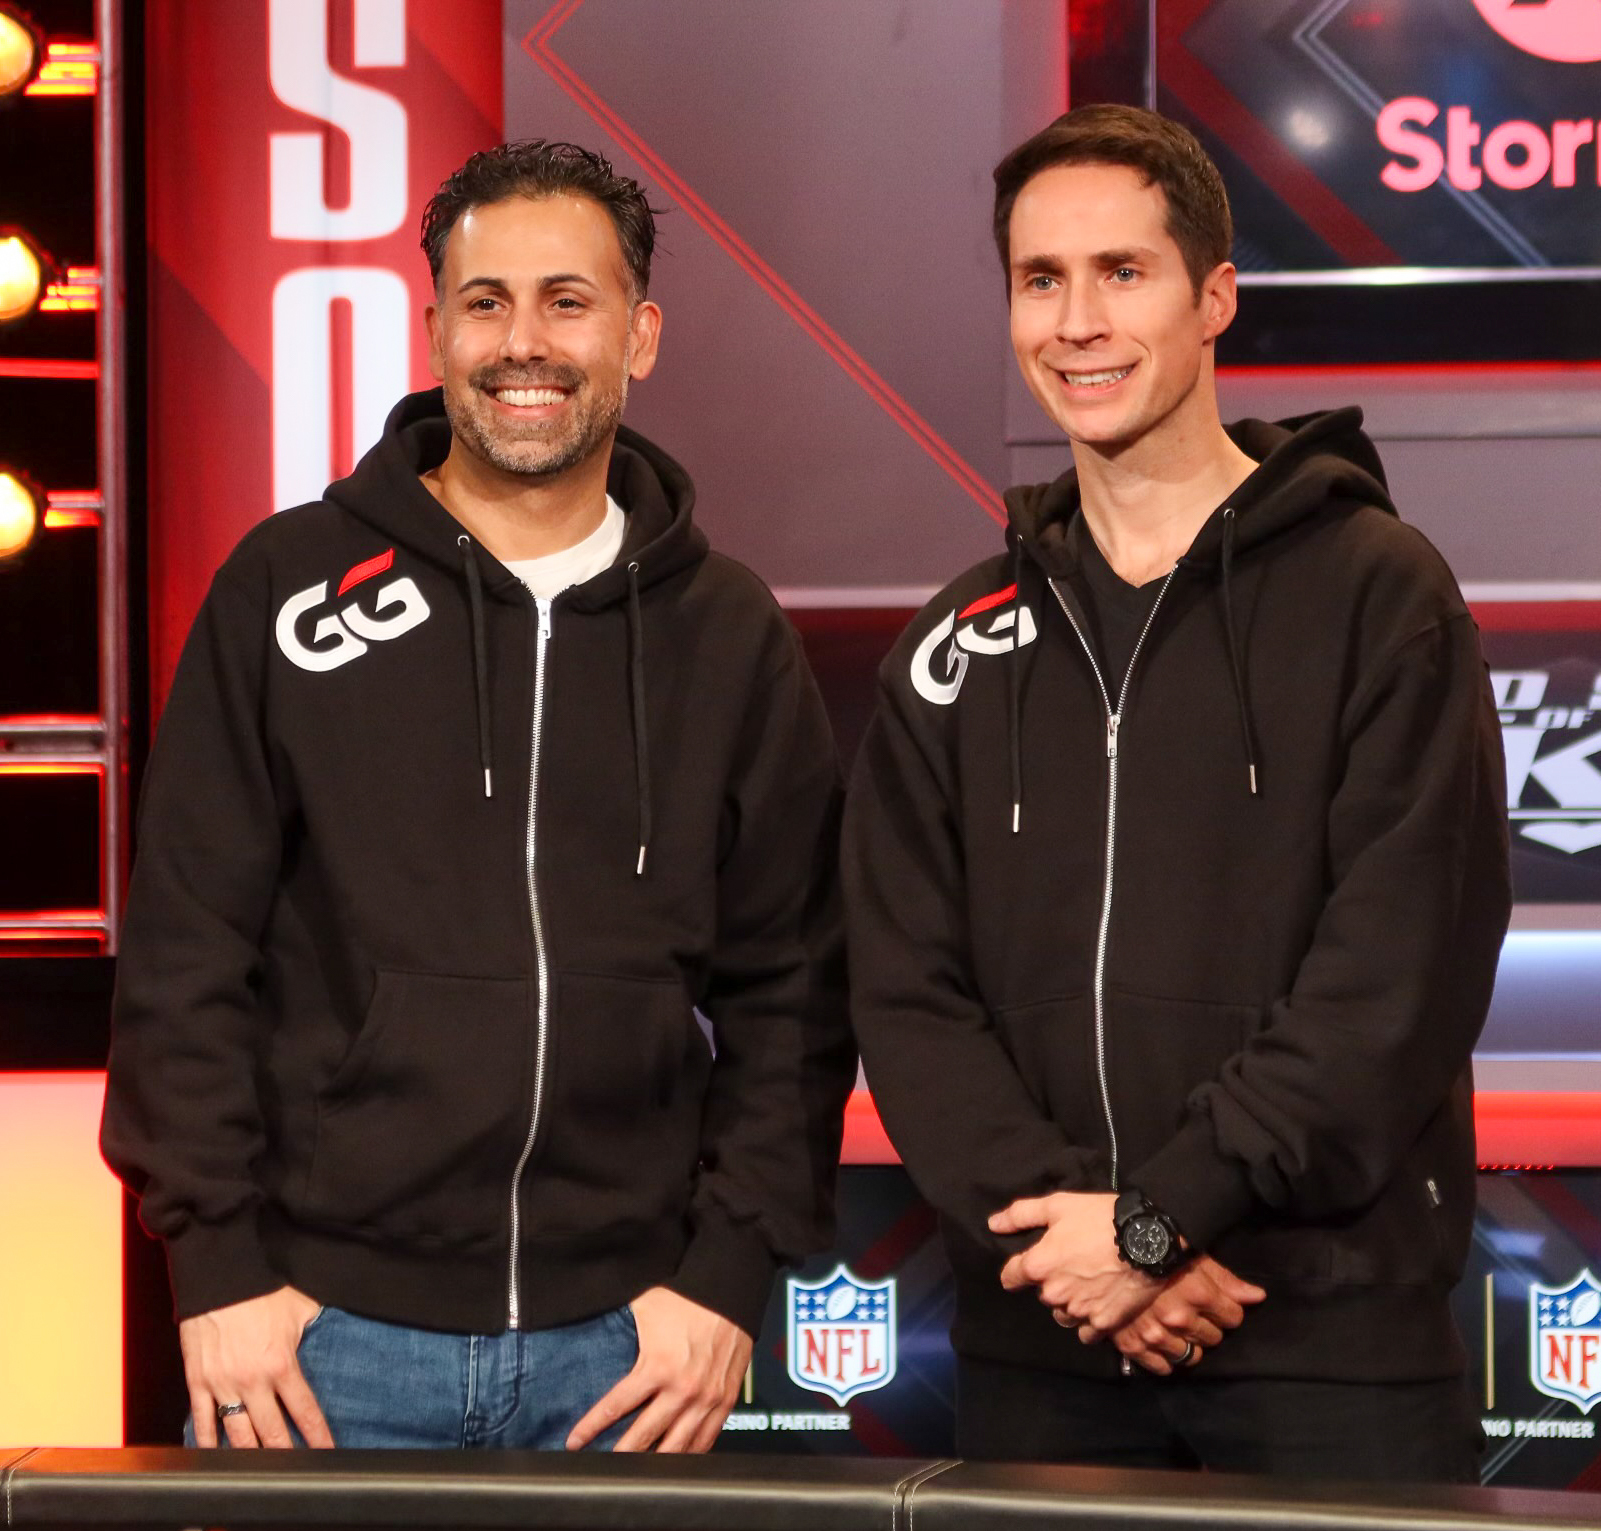 Fun Fact: Jeff Gross First Poker Pro To Rep Four Major Online POker Sites